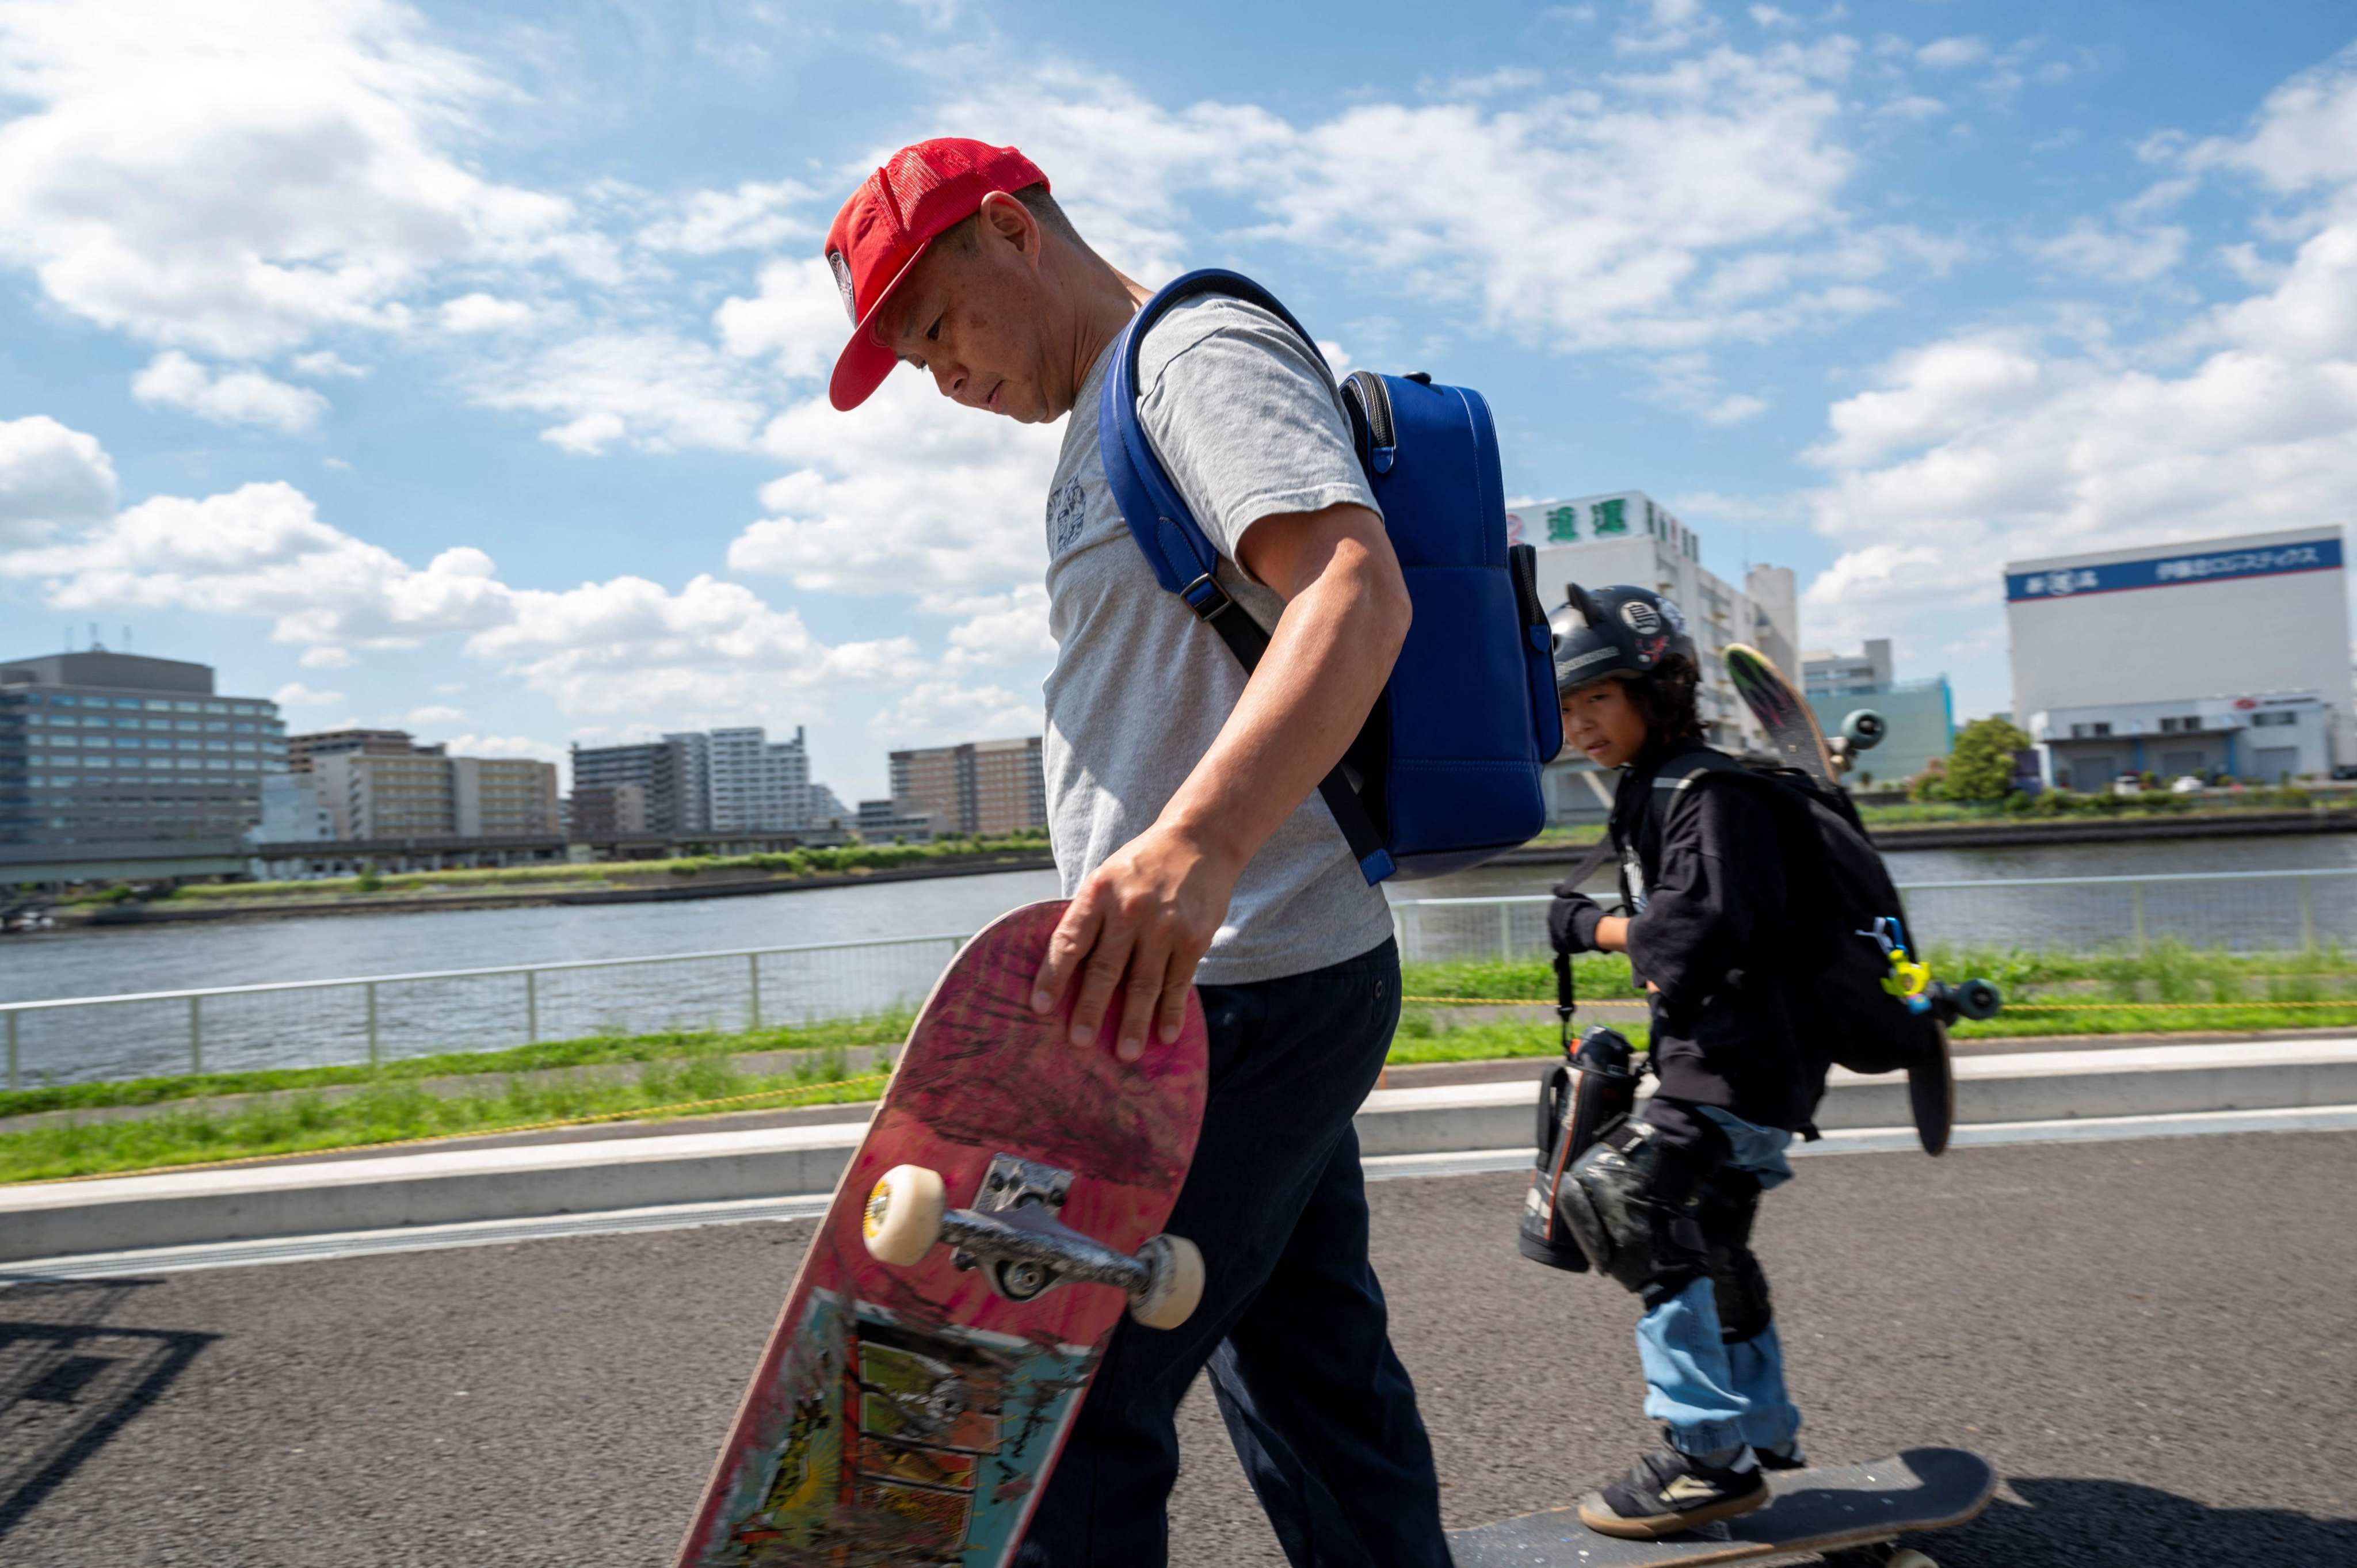 Skateboarding in Japan has risen in popularity and they are expected to dominate the sport at the Paris Olympics. Photo: AFP